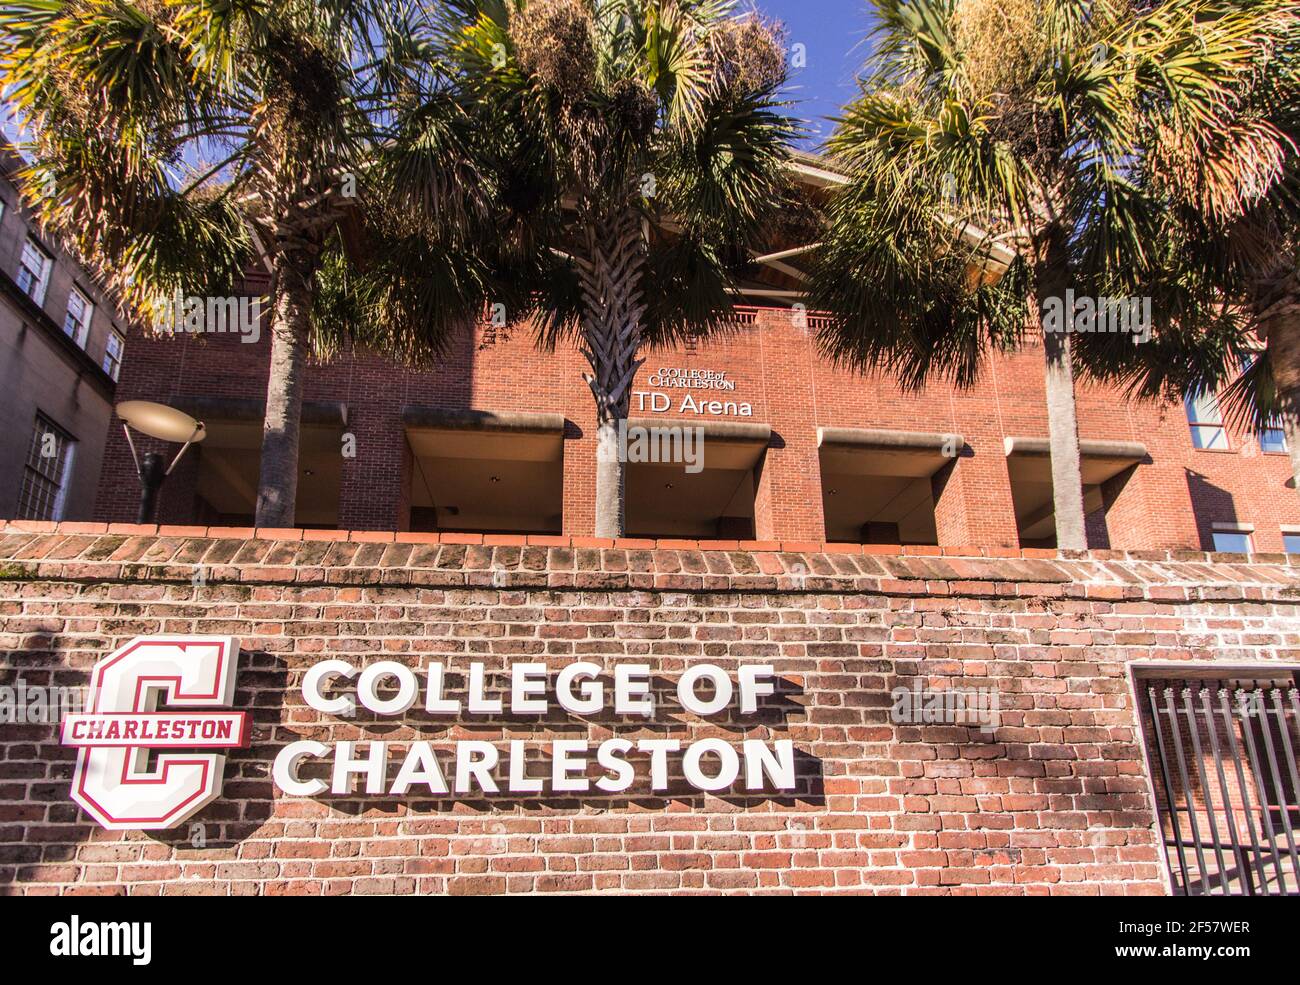 Exterior of the College of Charleston located in historic downtown Charleston. The college was founded in 1770 and is one of the oldest in America. Stock Photo